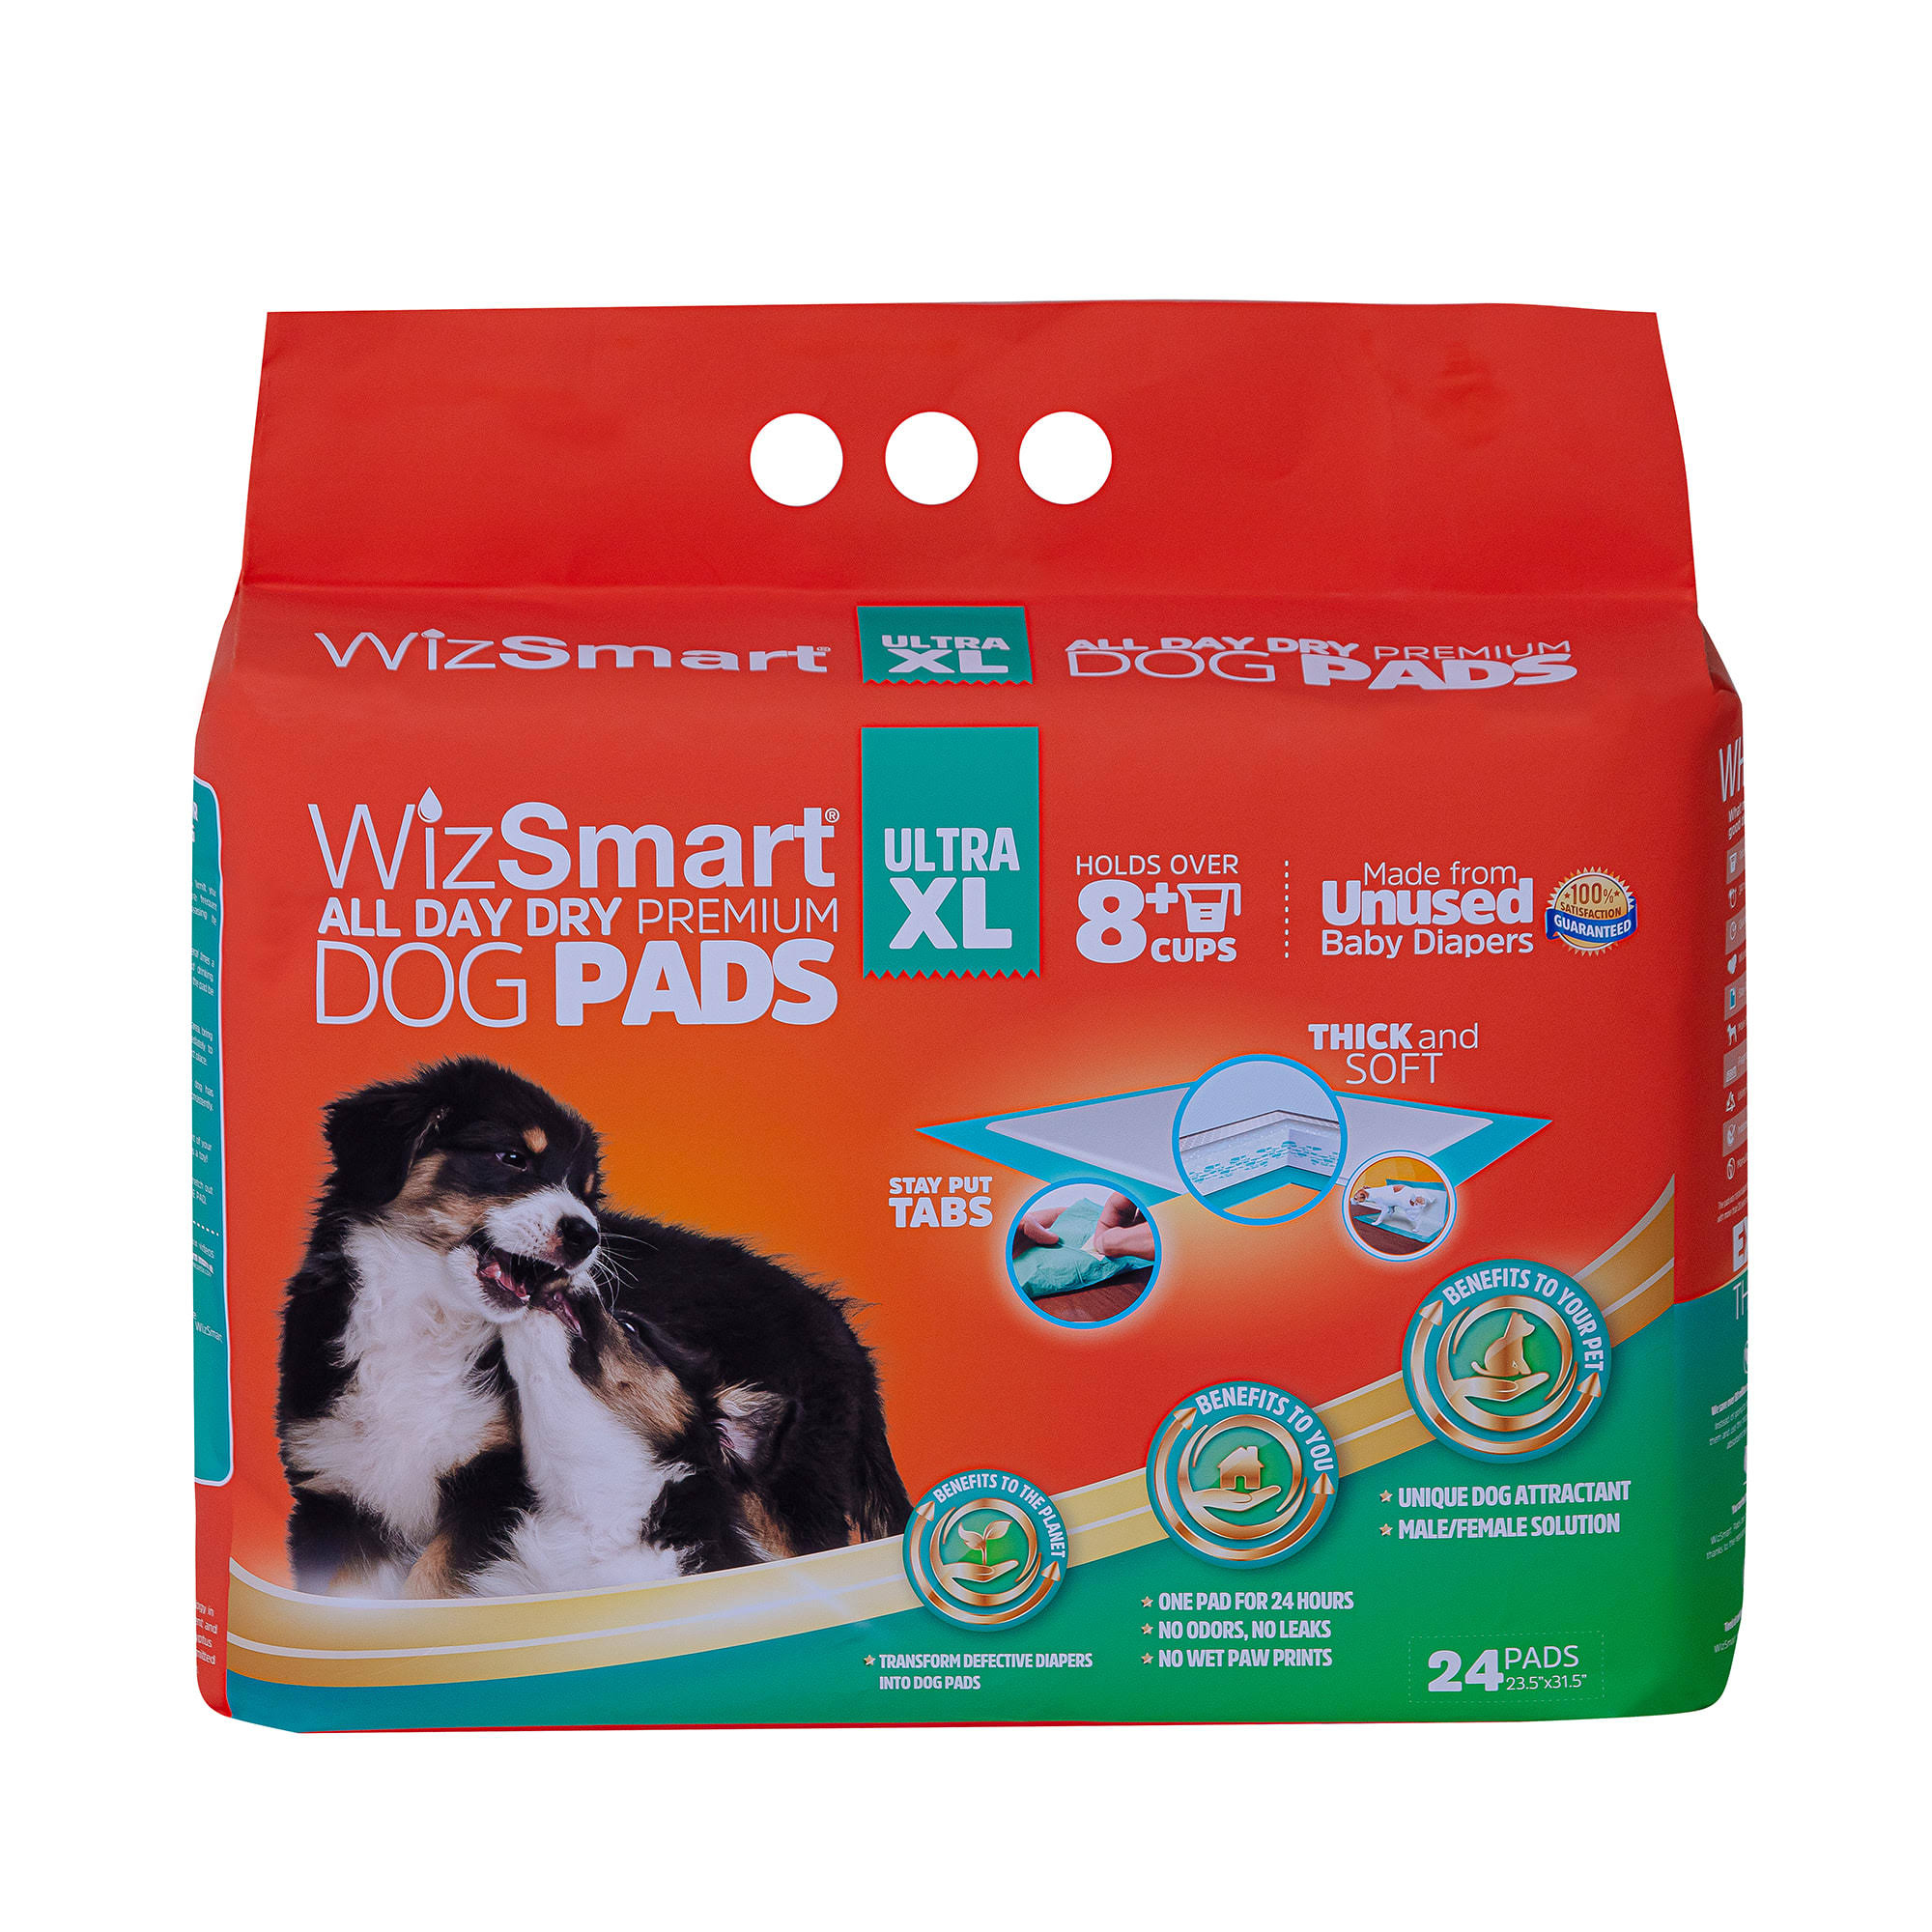 WizSmart All-Day Dry Premium Dog and Puppy Potty Training Pads, Quick Drying, Absorbent, and Odor Free with Stay Put Tabs, 10+ Cup Ultra XL